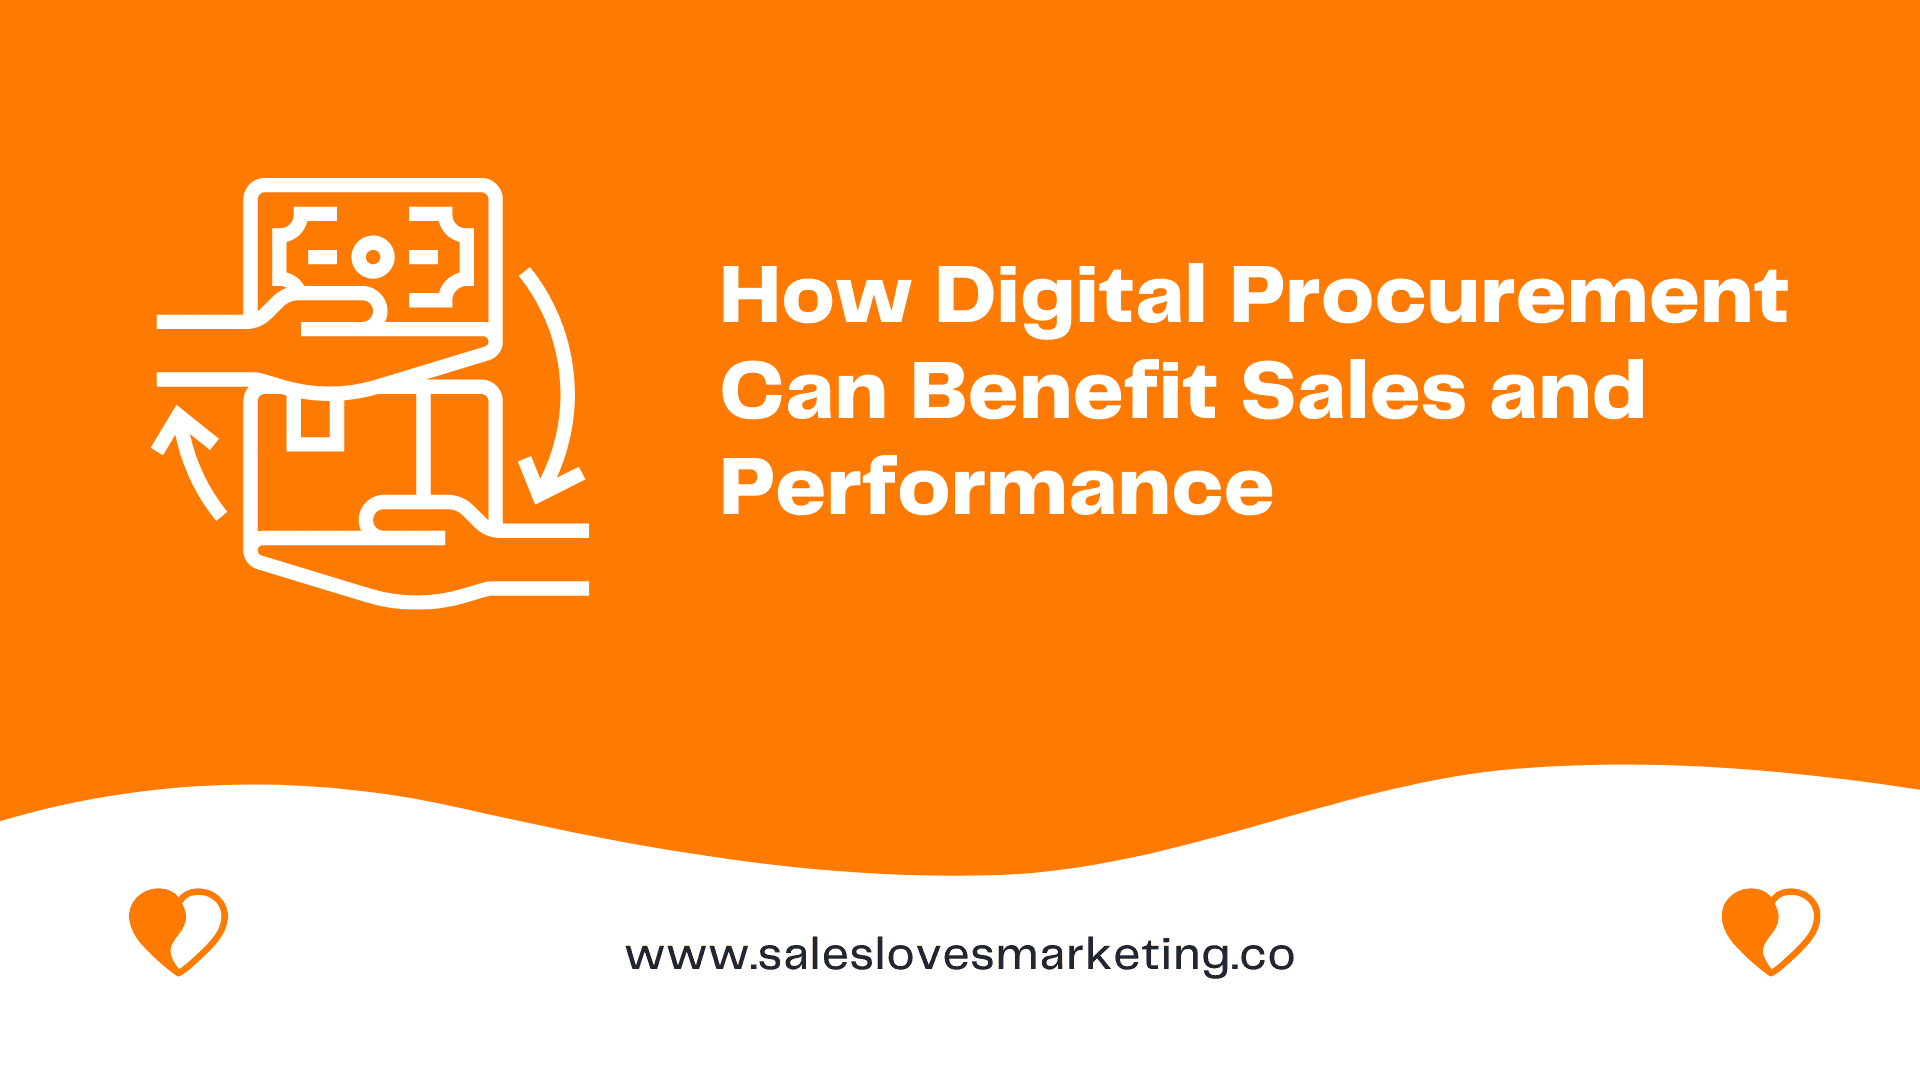 How Digital Procurement Activities Can Benefit Sales and Performance